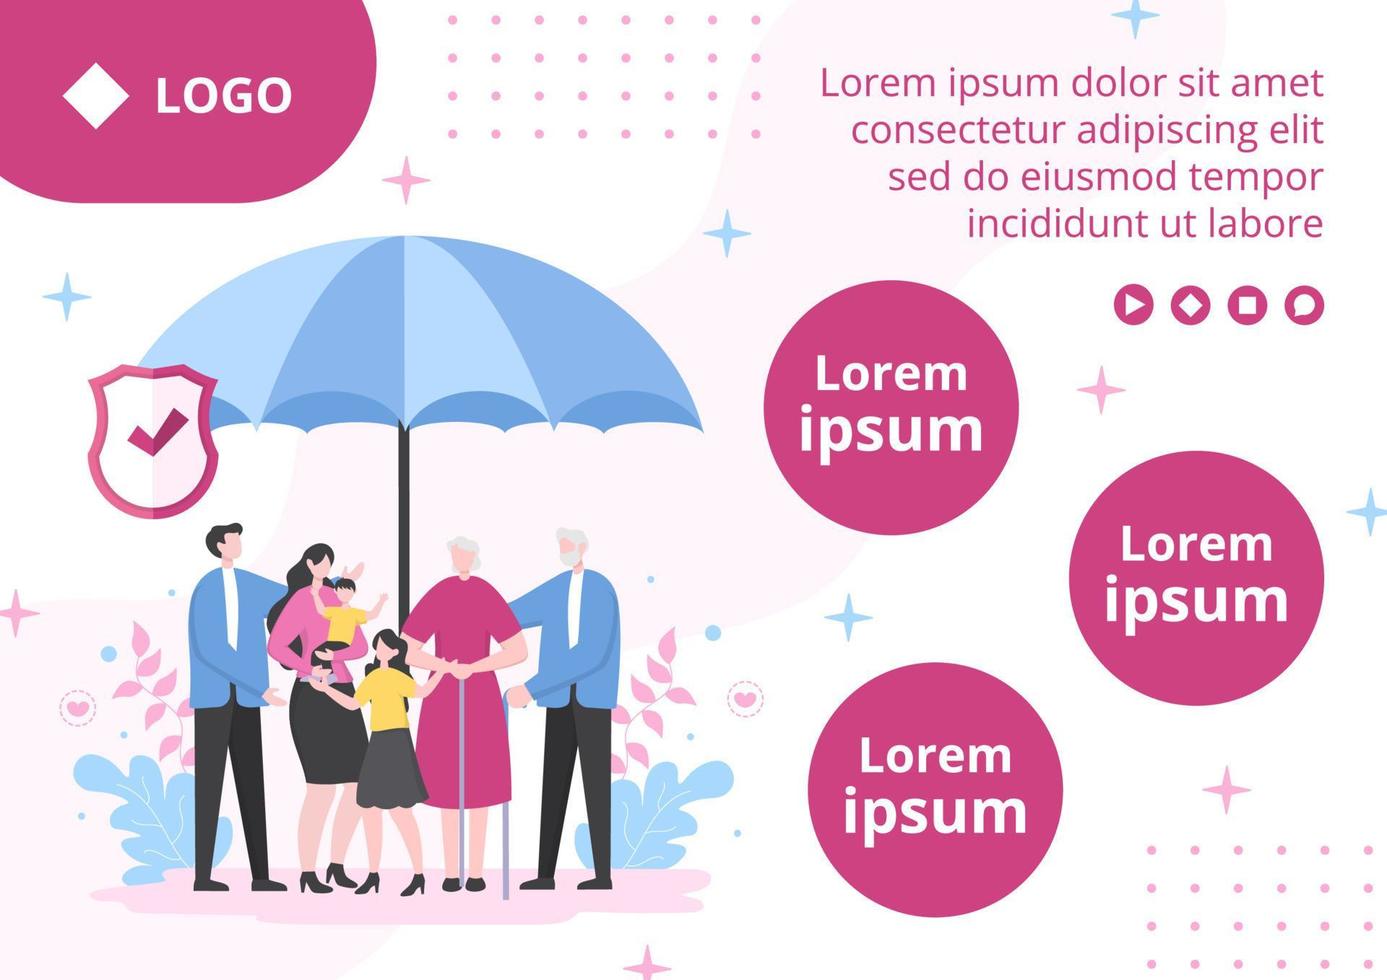 Life Insurance Brochure Template Flat Design Illustration Editable of Square Background Suitable for Social media, Greeting Card or Web Internet Ads vector